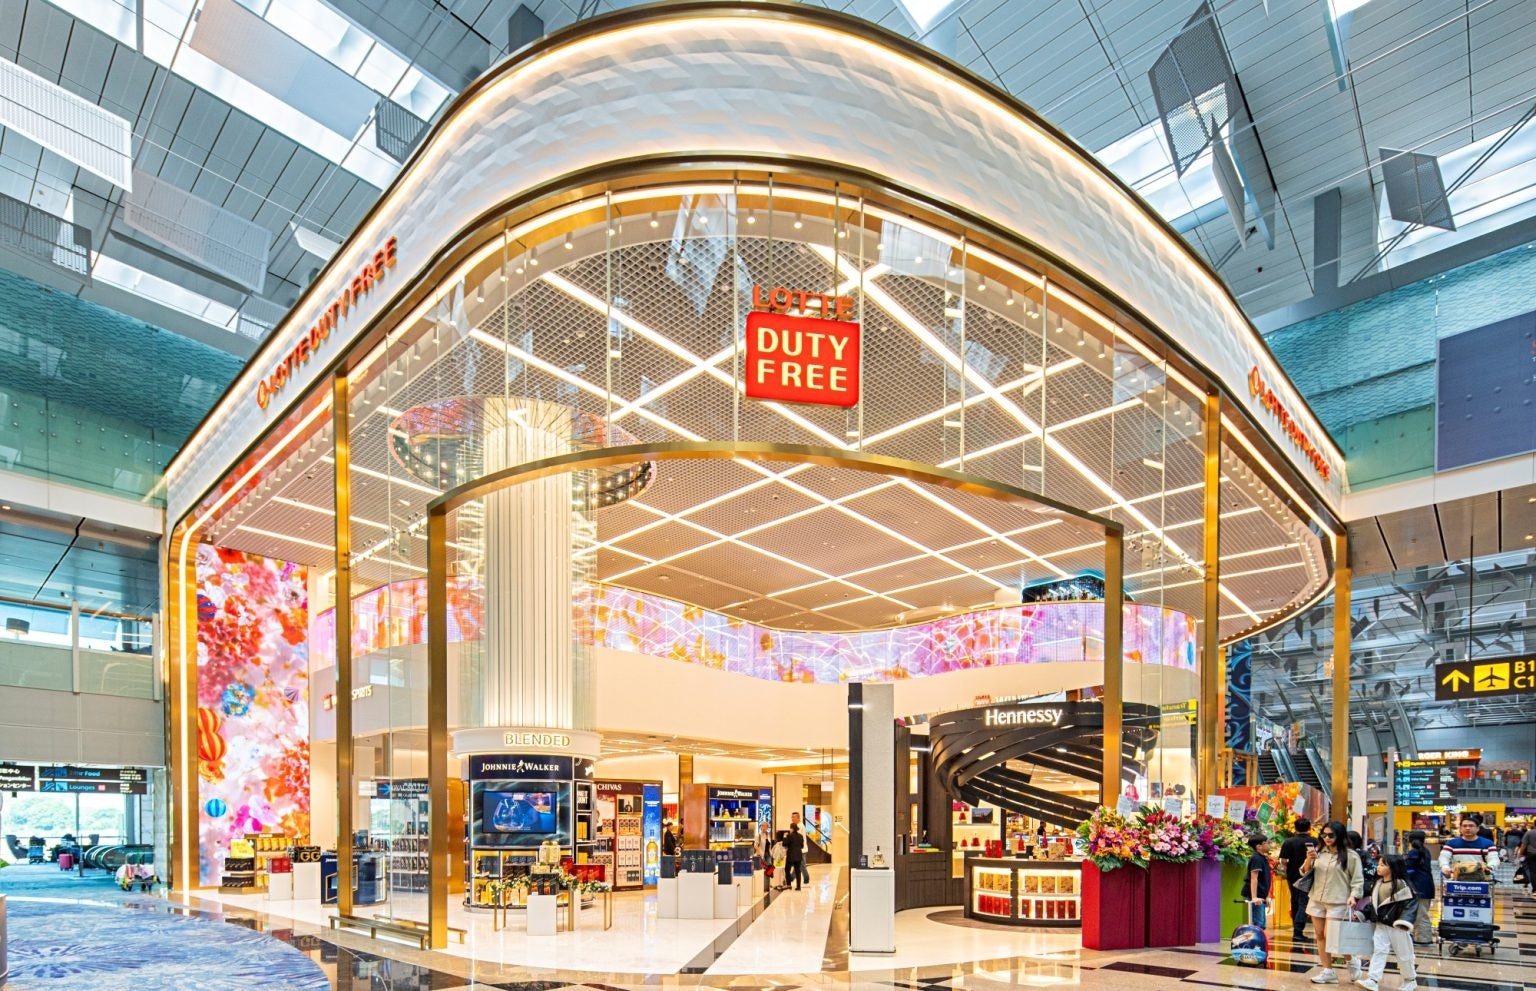 On January 19, Lotte Duty Free held a grand opening ceremony for its Changi Airport store in Singapore. Photo: Lotte Duty Free
